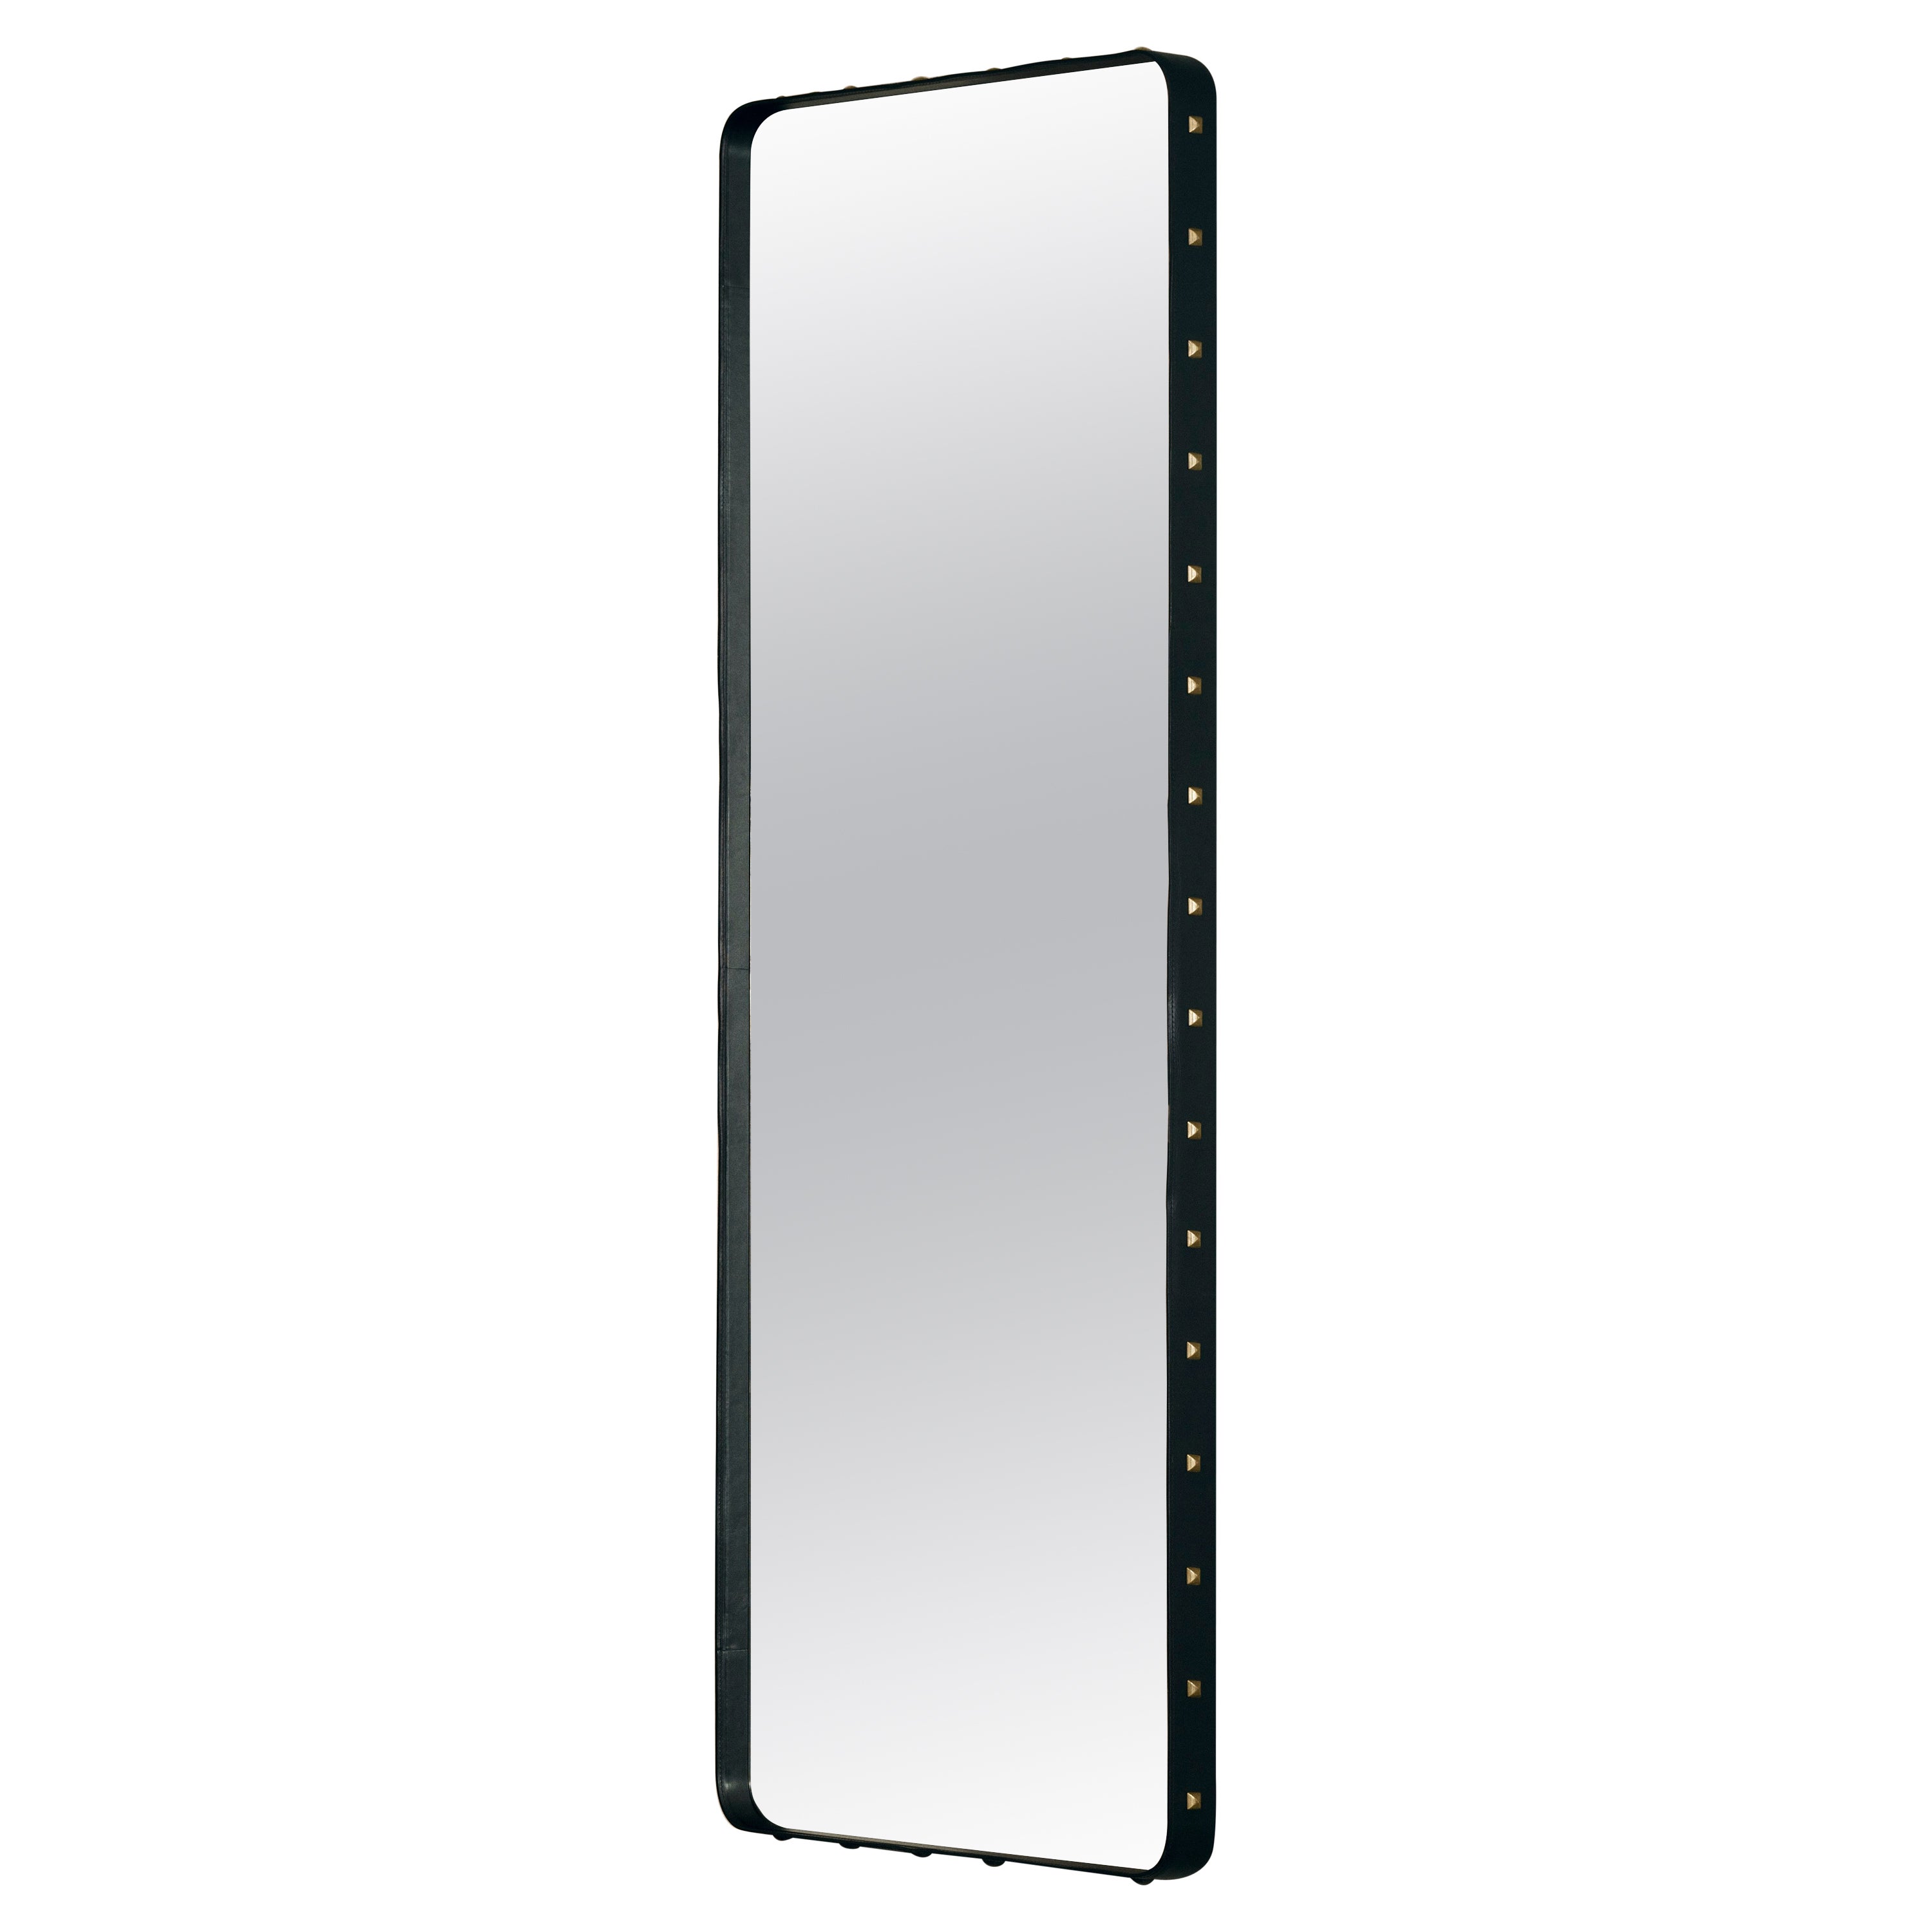 Large Jacques Adnet 'Rectangulaire Mirror' Wall Mirror in Black Leather for GUBI